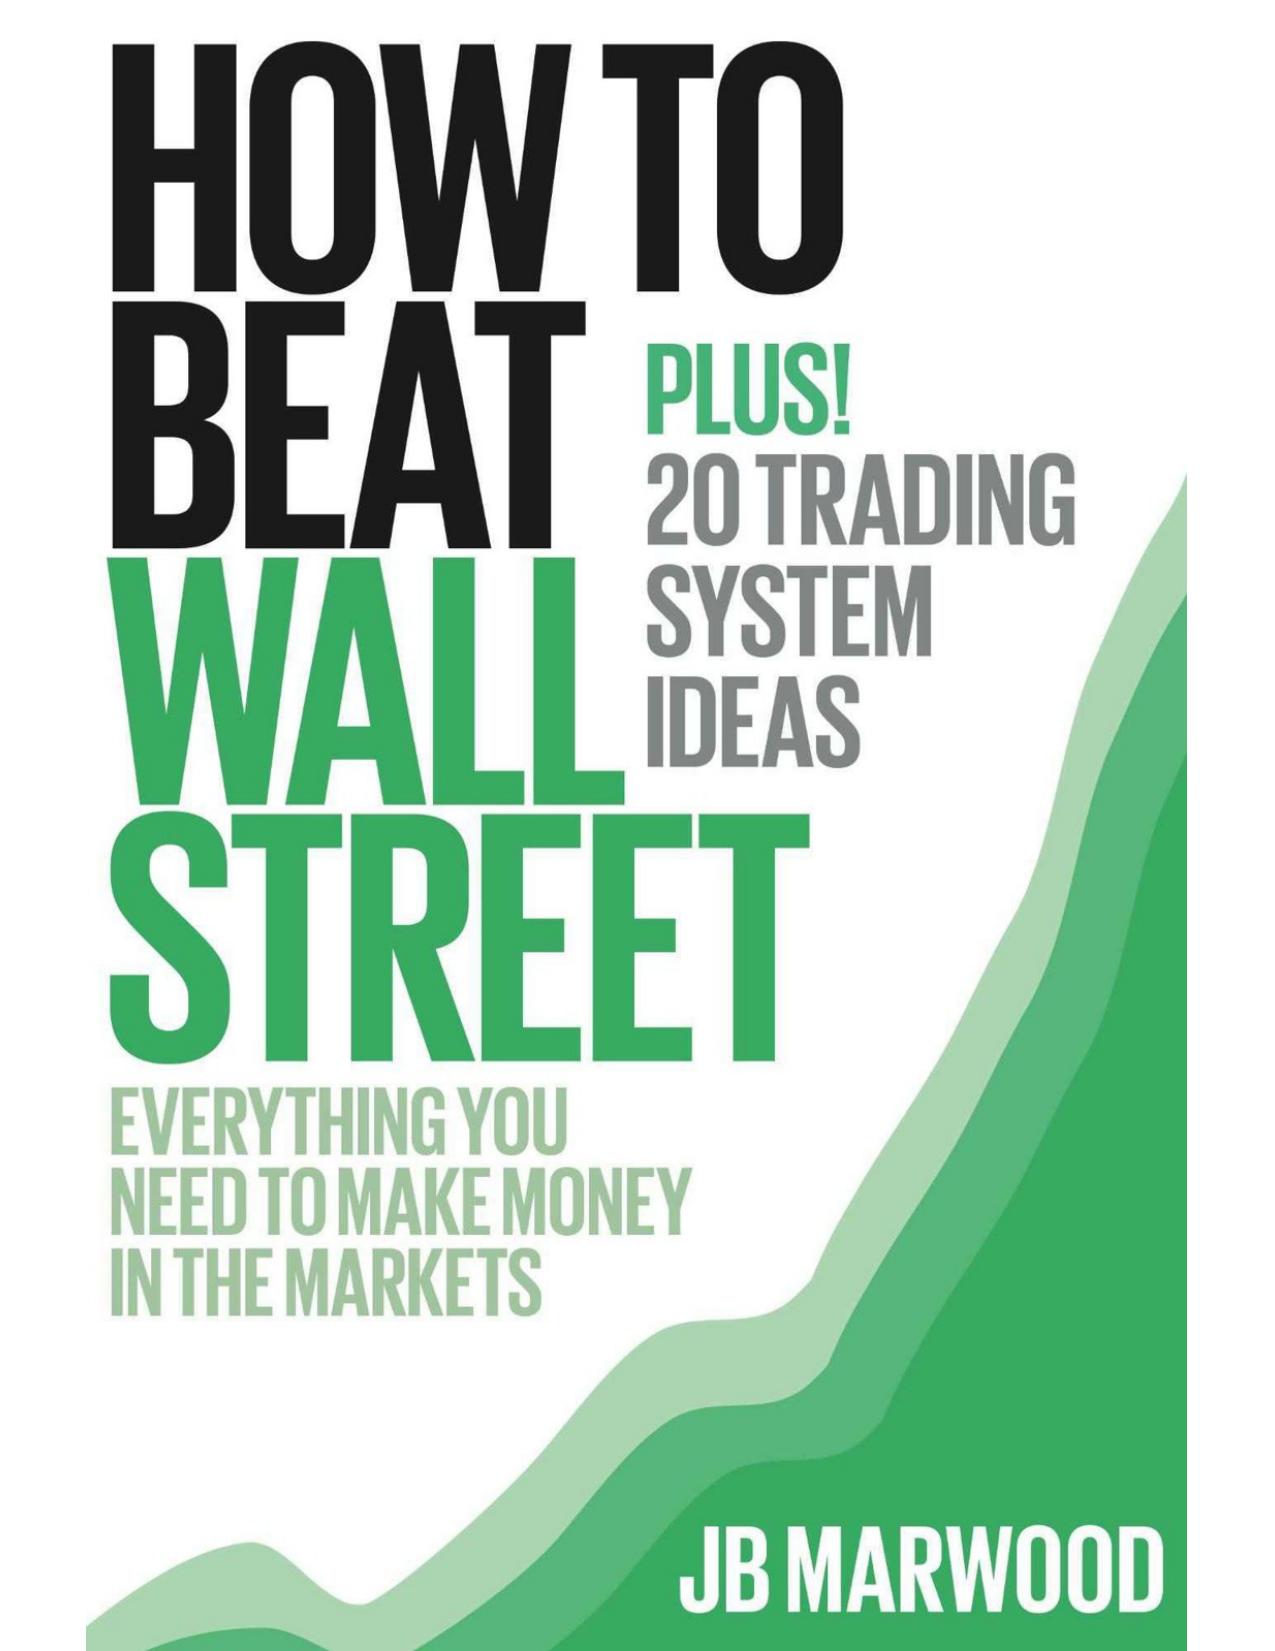 How to Beat Wall Street â Everything You Need to Make Money in the Markets Plus! 20 Trading System Ideas by Marwood JB